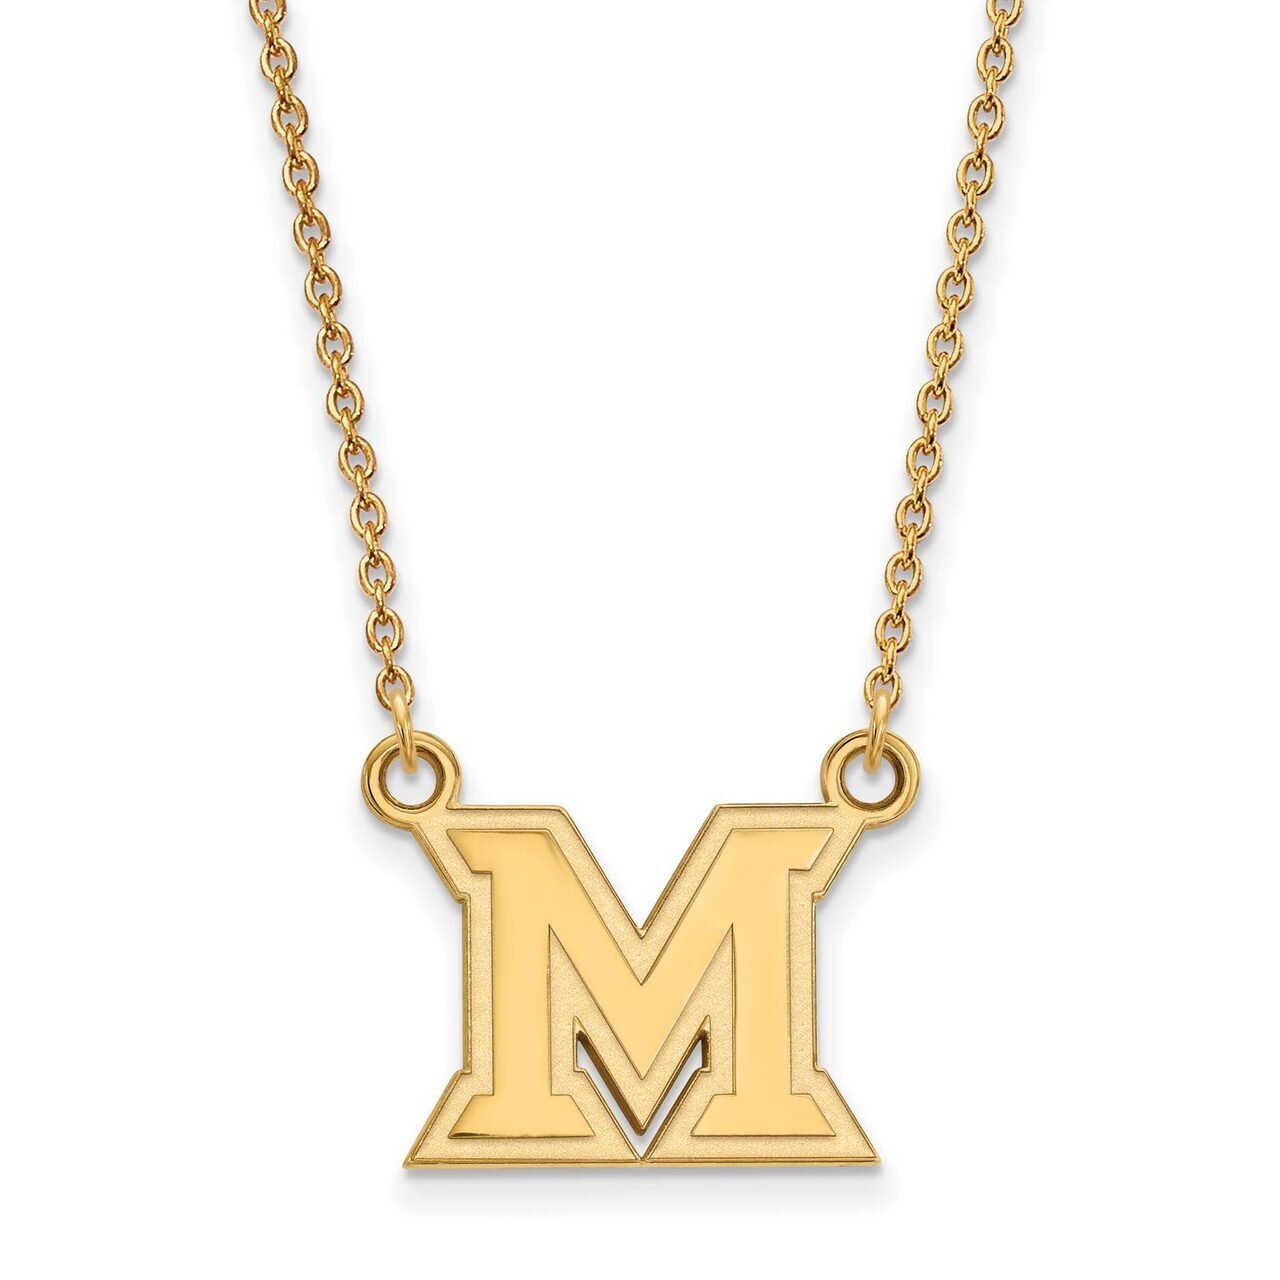 Miami University Small Pendant with Chain Necklace 10k Yellow Gold 1Y011MU-18